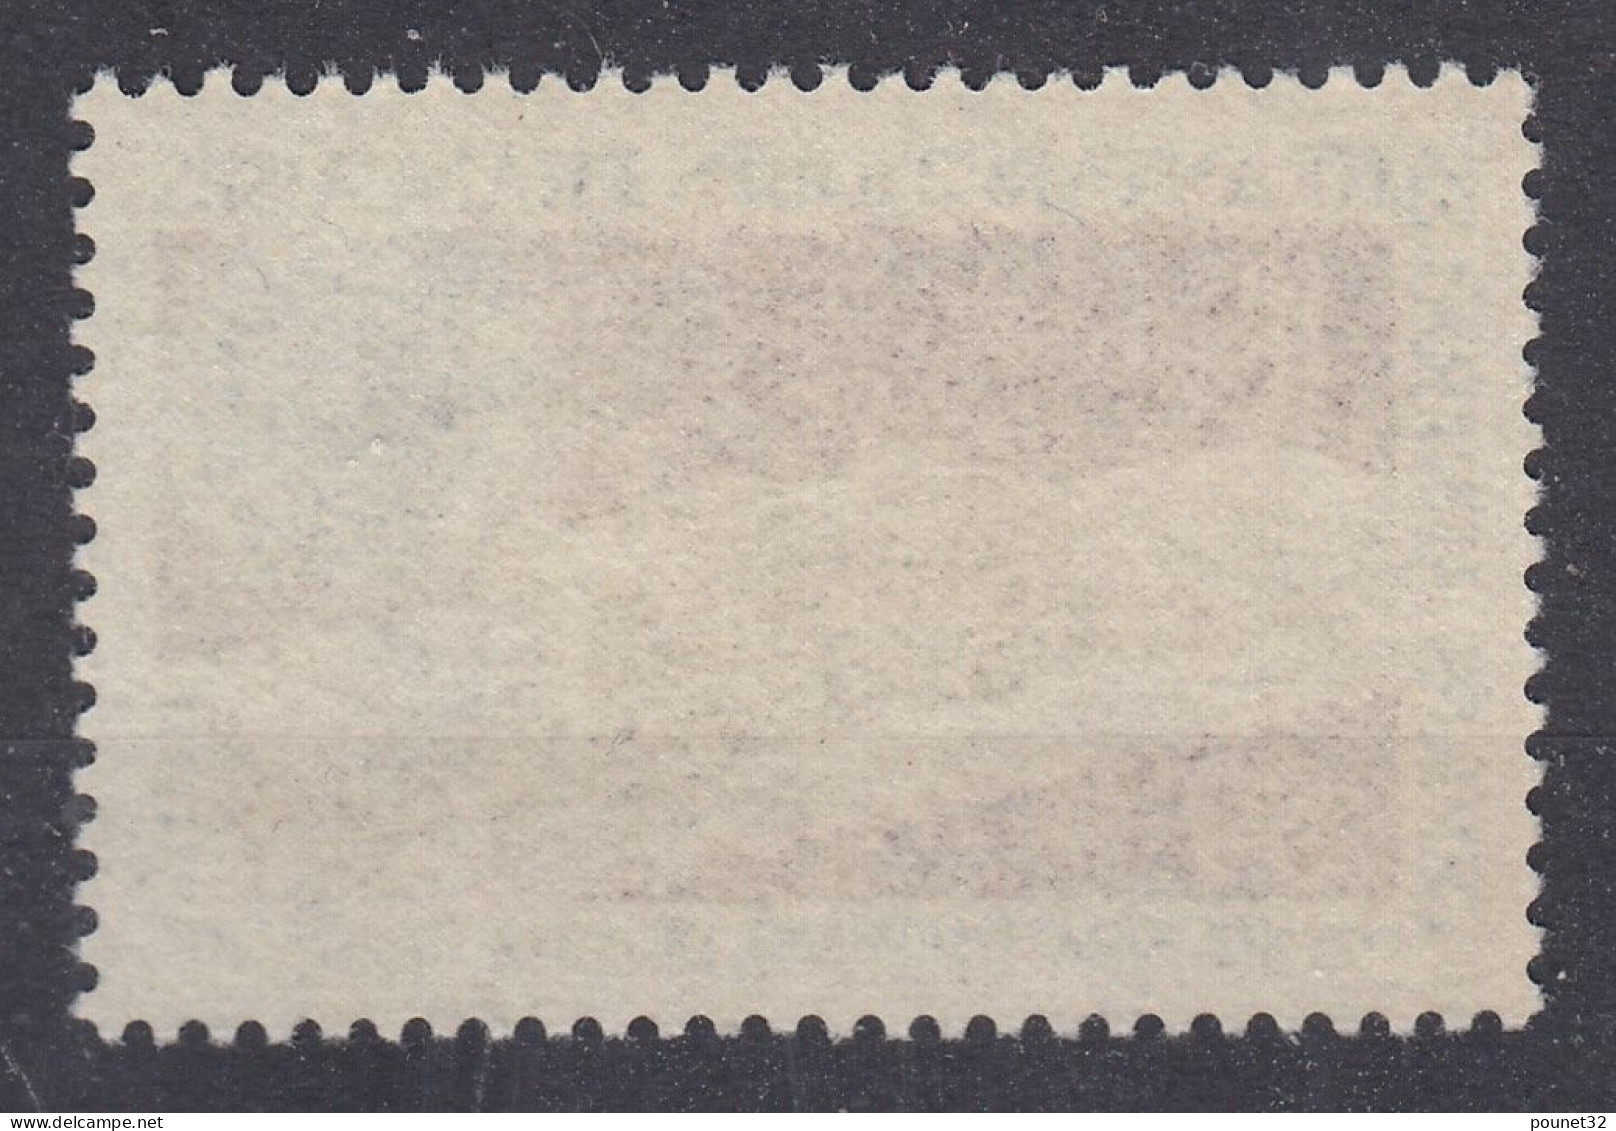 TIMBRE TAAF BATIMENT DE UPU 1970 N° 33 NEUF ** GOMME SANS CHARNIERE - Unused Stamps